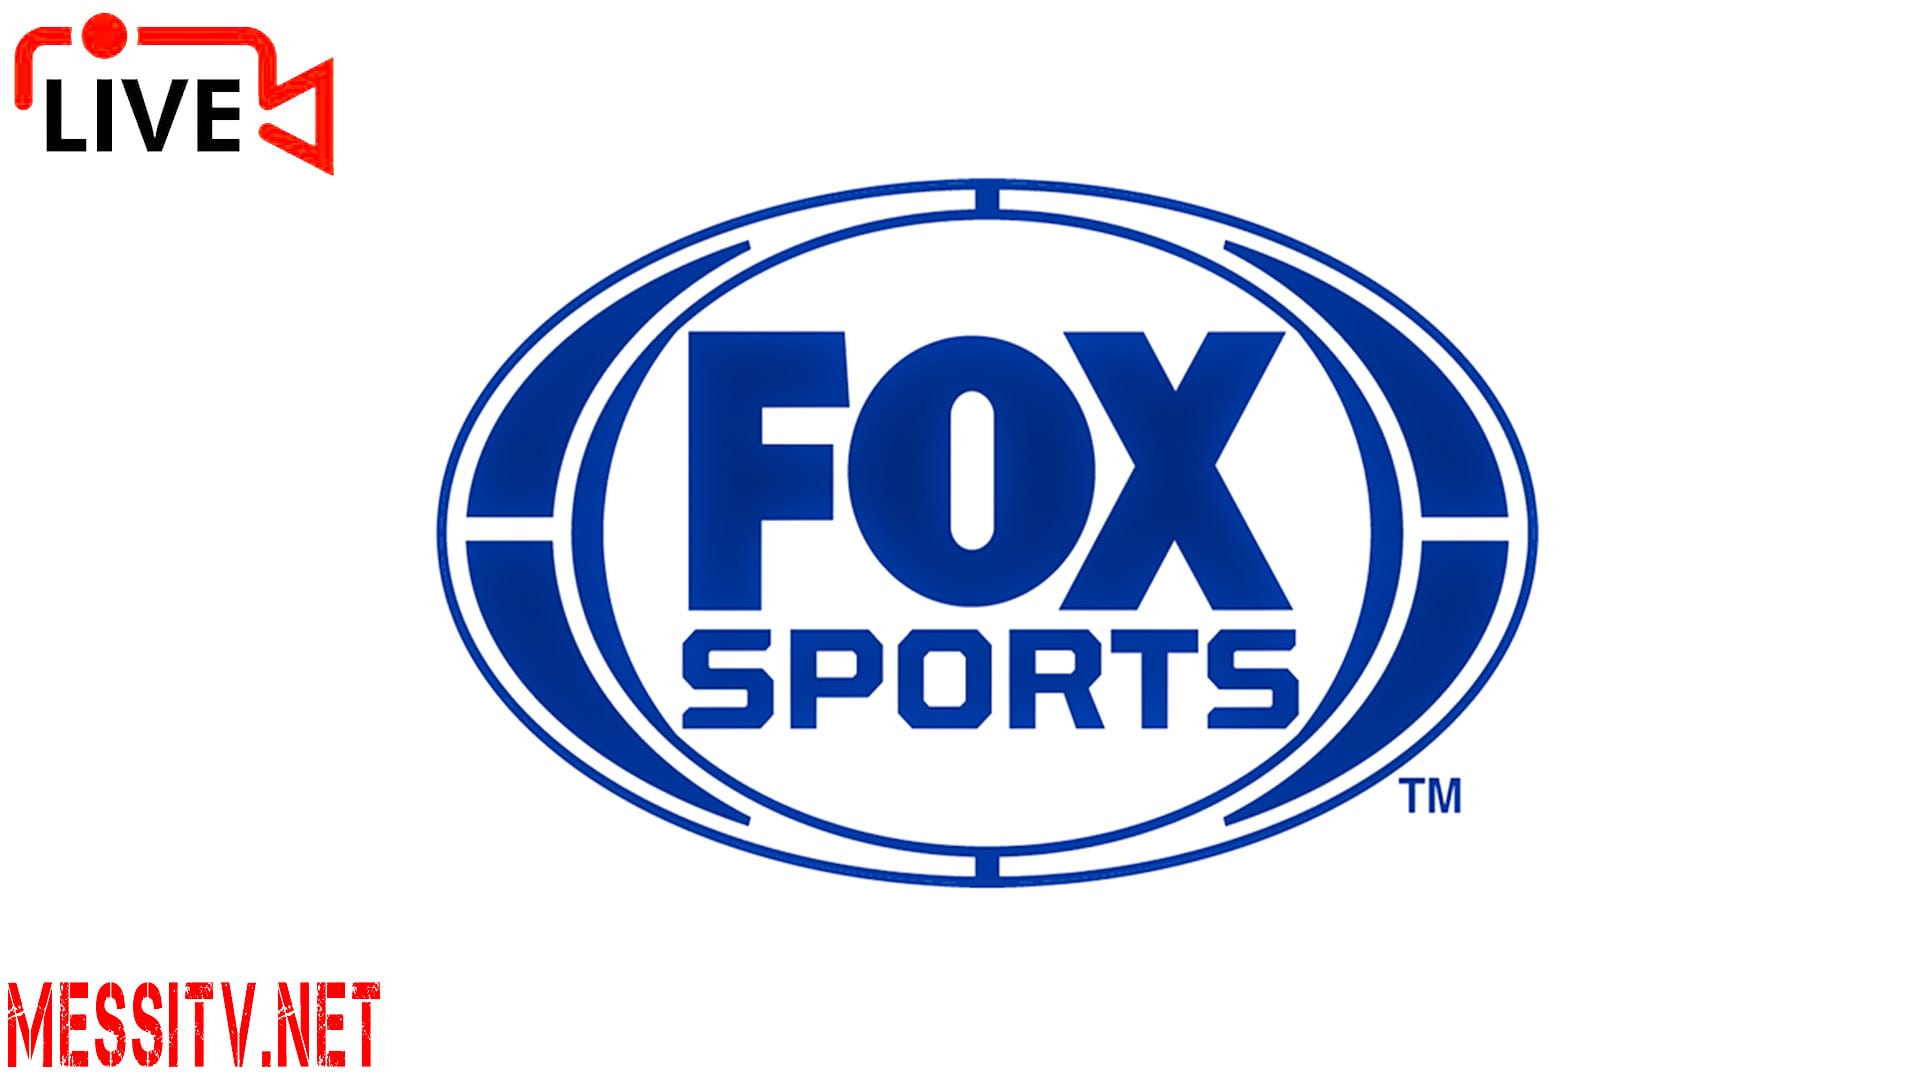 Fox Sports 1 Fs1, Fox Sports 2 Fs2, Fox Sports Kansas, Fox Sports News, Fox Sports Premium, Fox Sports Prime, Fox Sports Southwest, Fox Sports Arizona, Fox Sports Carolinas, Fox Sports Dallas, Fox Sports Deportes, Fox Sports Detroit, Fox Sports Florida, Fox Sports Indiana, Fox Sports Midwest, Fox Sports North, Fox Sports Ohio, Fox Sports Oklahoma, Fox Sports Sem, Fox Sports Soccer, Fox Sports Southeast, Fox Sports Sun, Fox Sports Texarkana, Fox Sports West, Fox Sports Wisconsin, Fox Soccer Plus, Fox Sports Yes